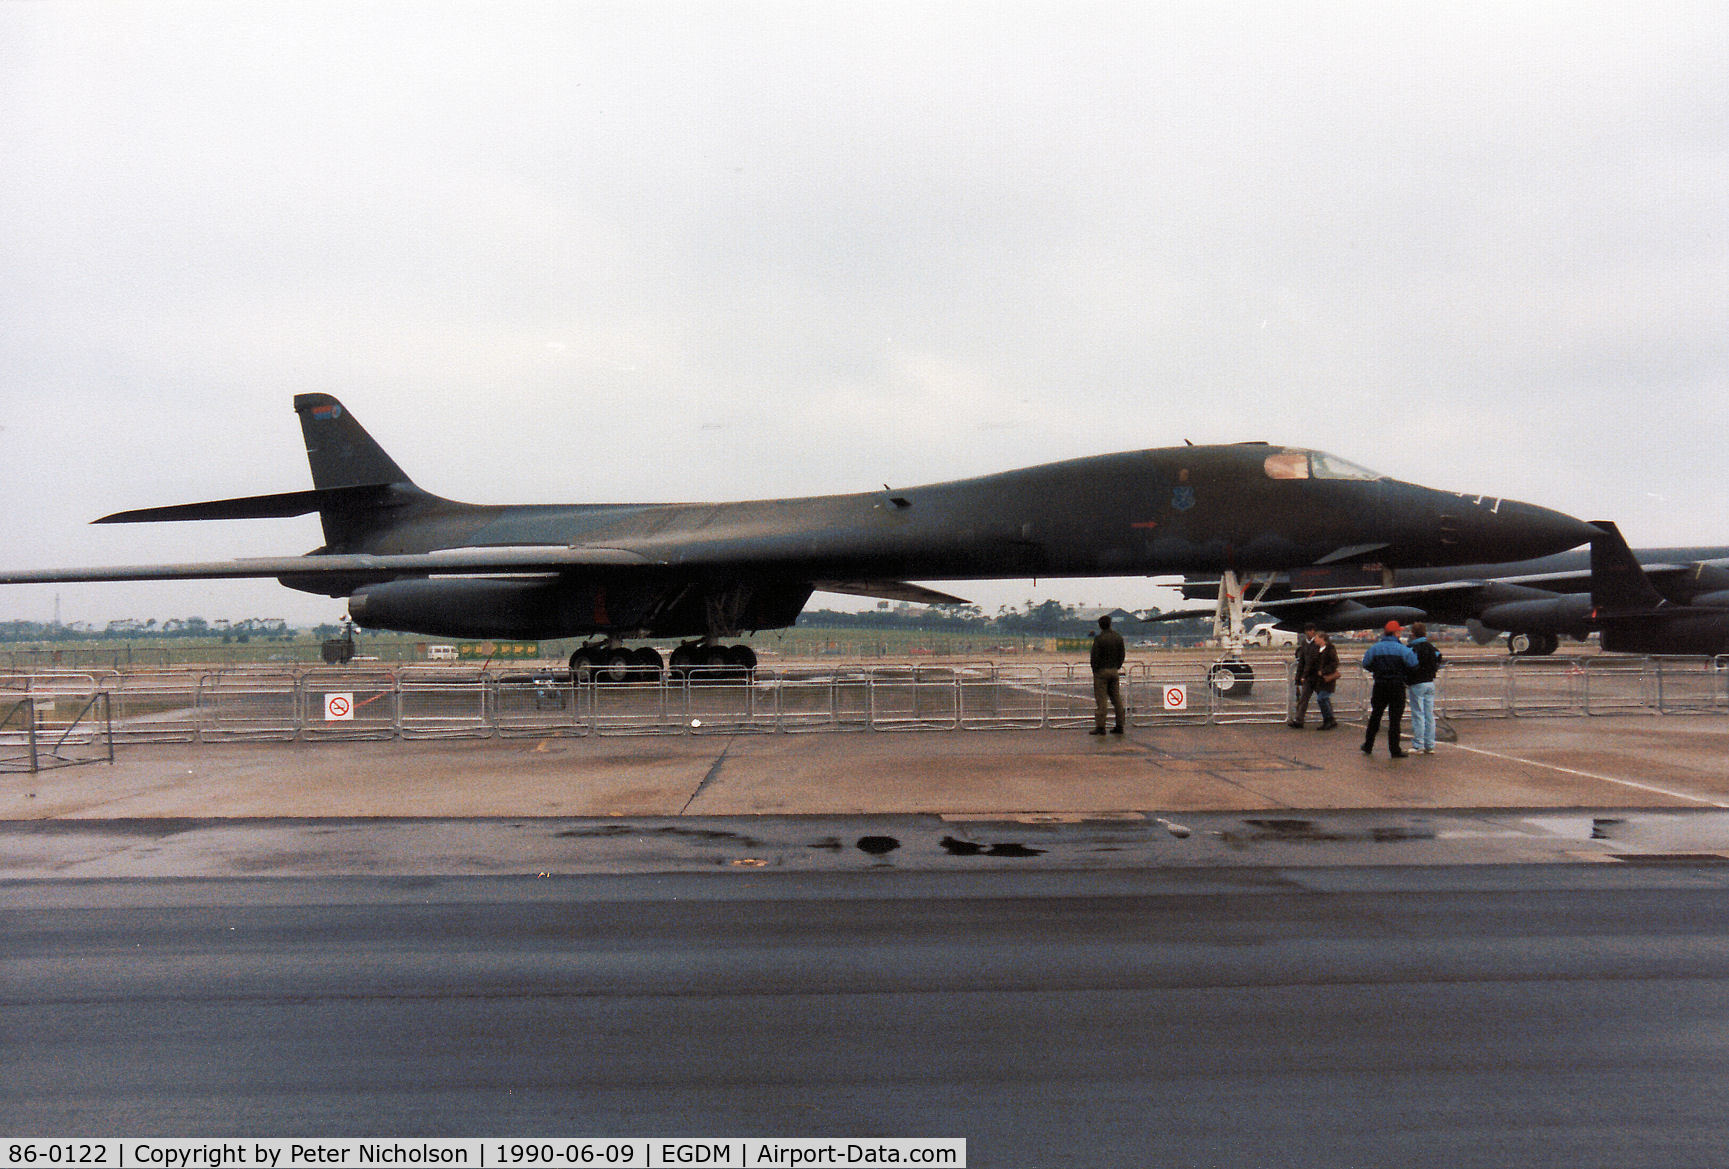 86-0122, 1986 Rockwell B-1B Lancer C/N 82, B-1B Lancer named Excalibur, callsign Norse 43 of 319th Bomb Wing at Grand Forks AFB on display at the 1990 Boscombe Down Battle of Britain 50th Anniversary Airshow.